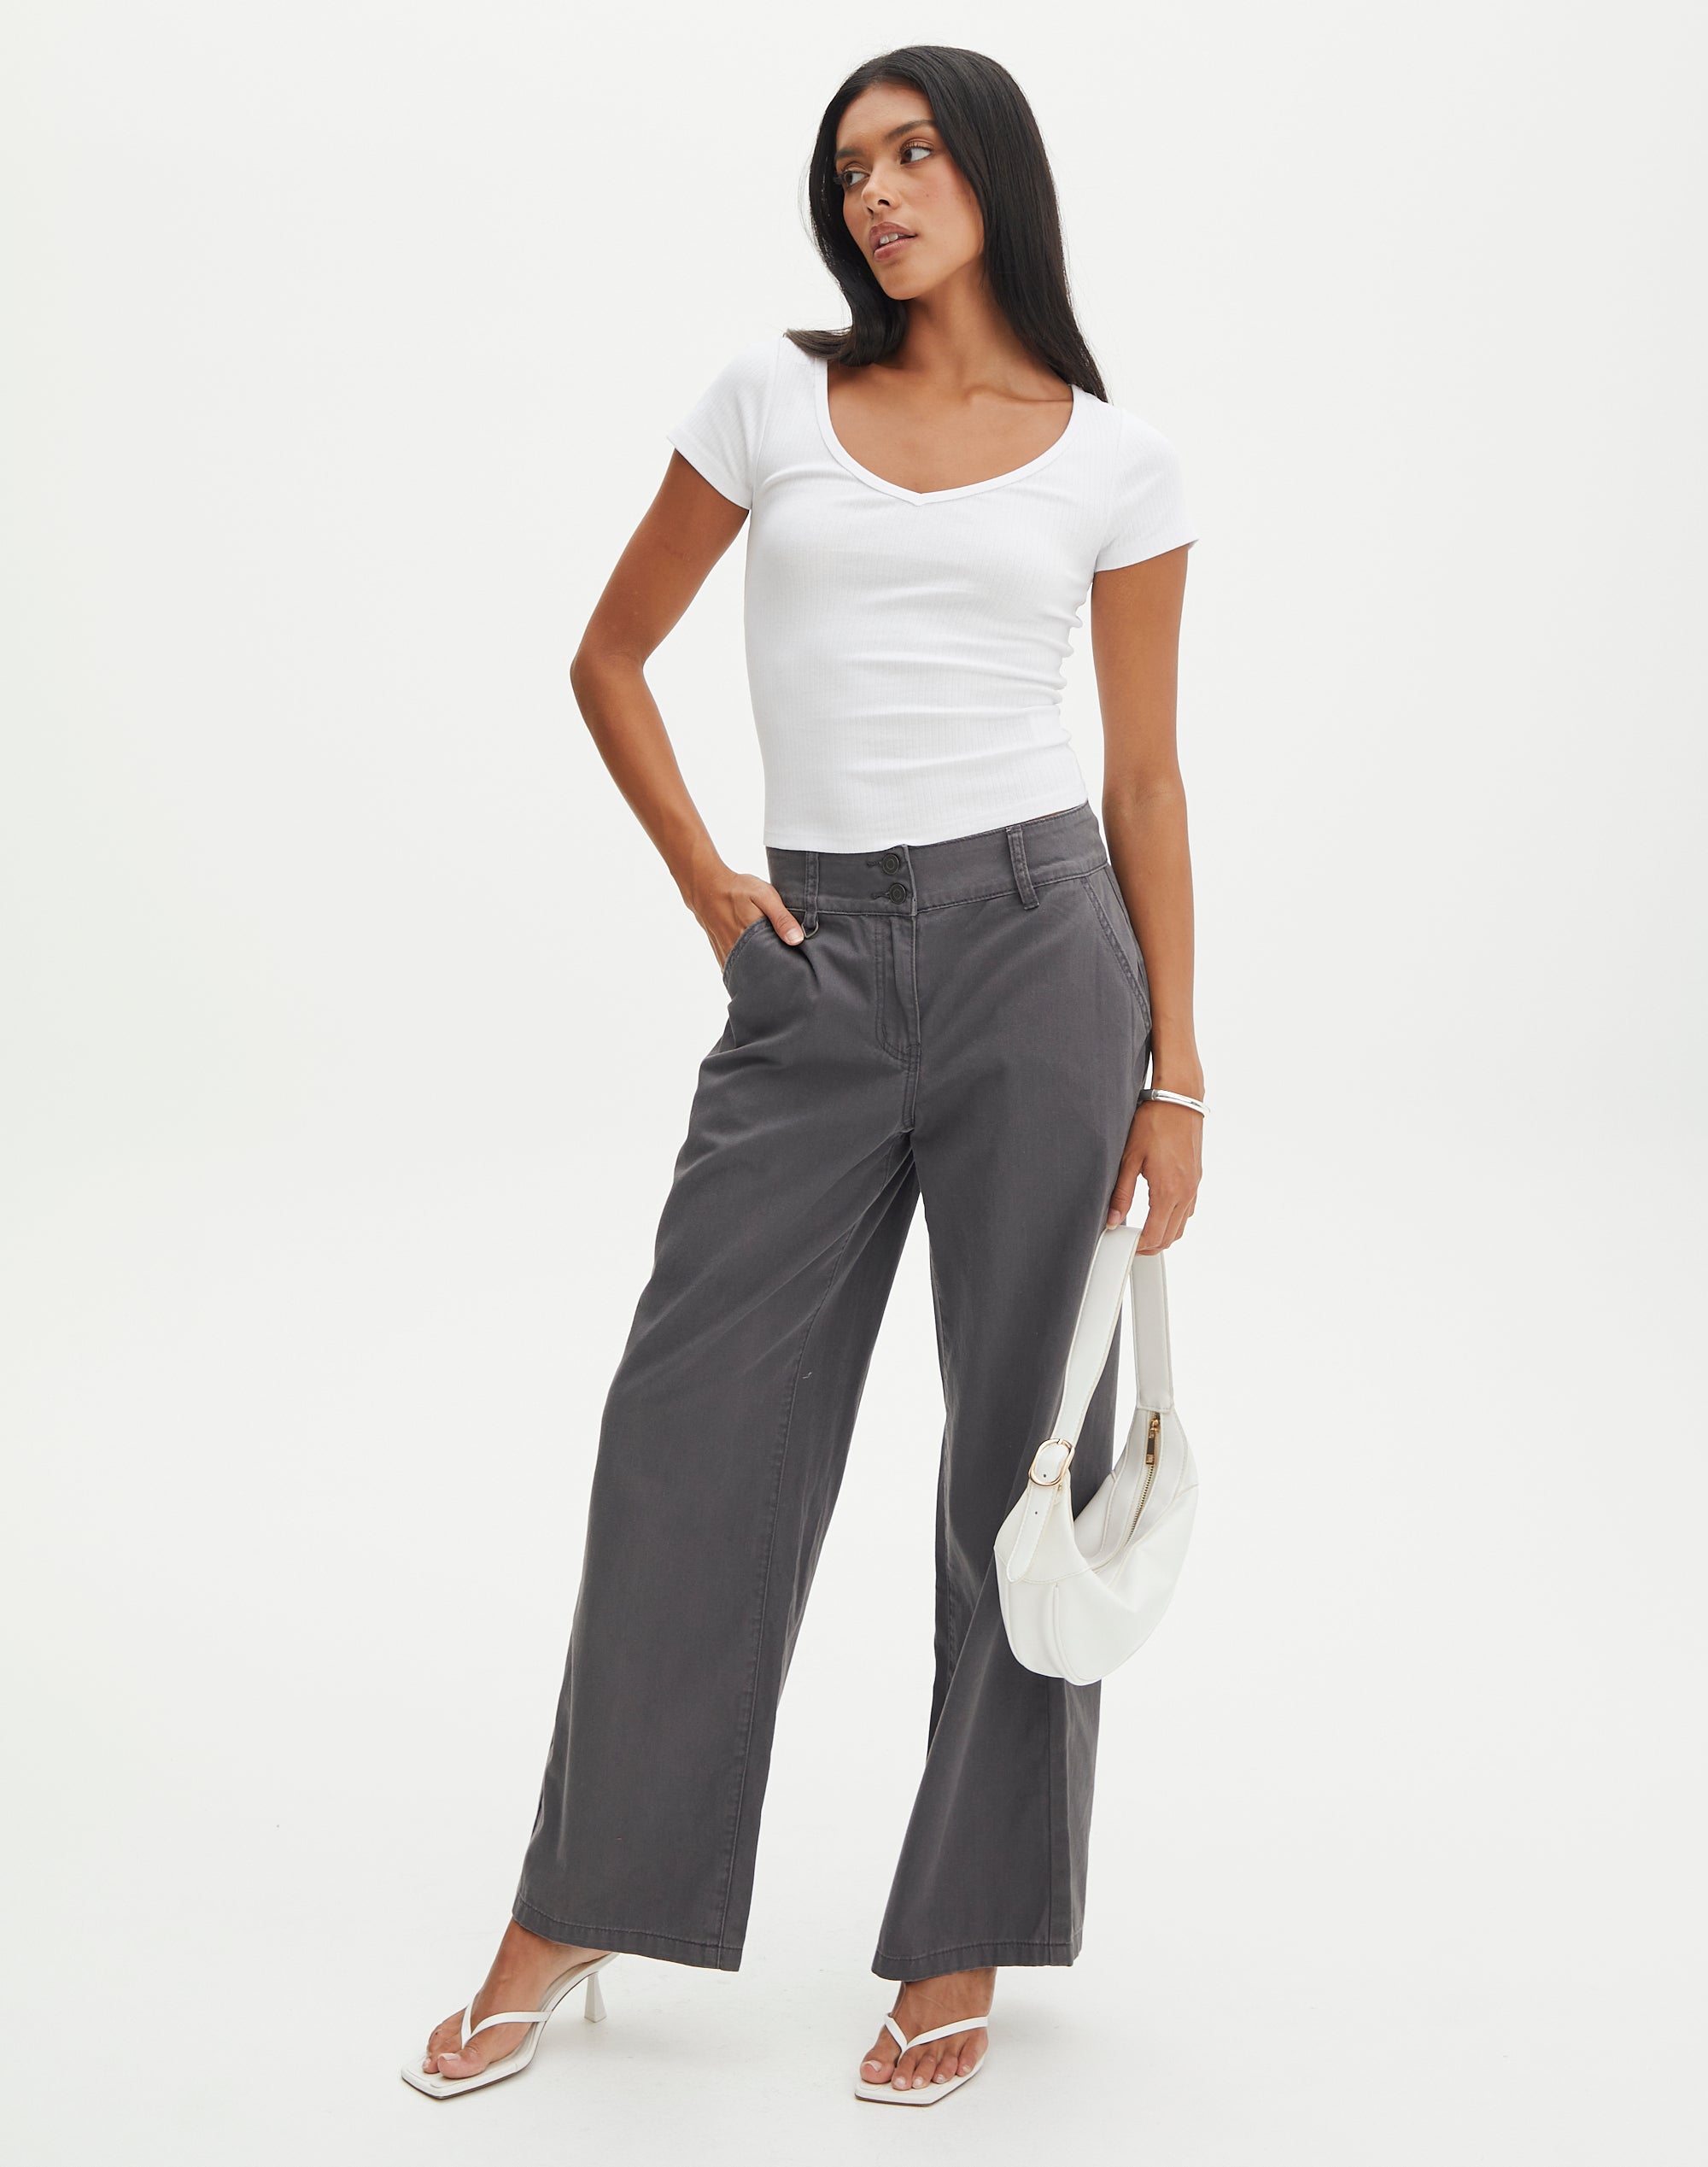 Double Button Wide Leg Pant in Shadow Dancer